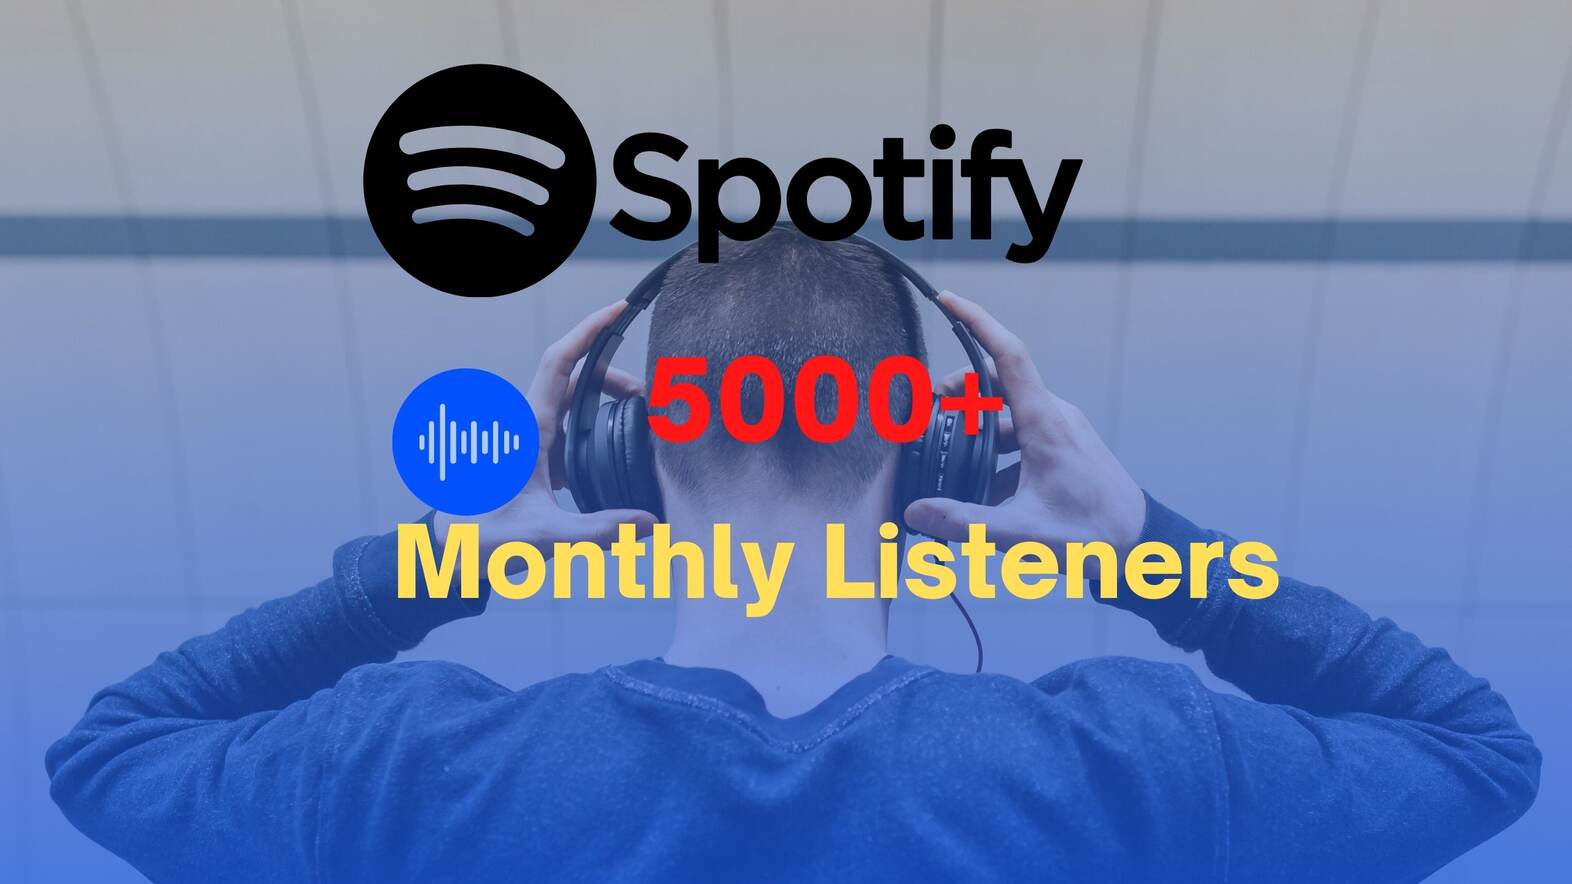 You will get 5000+ Spotify Monthly Listeners, Non-Drop, and Lifetime Guaranteed